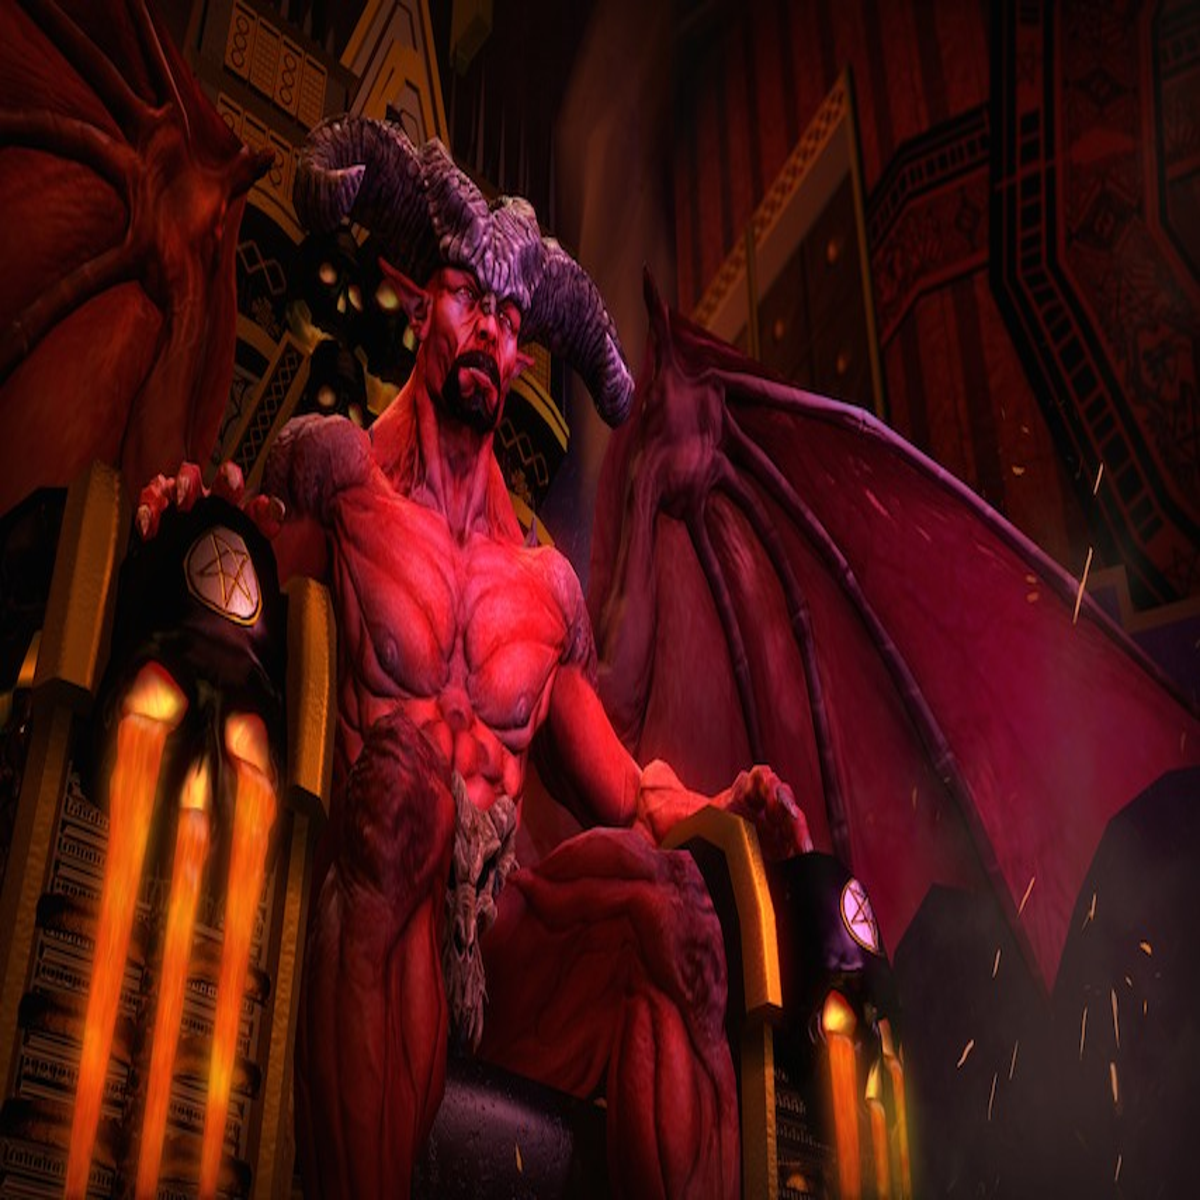 Saints Row on X: Meet the Arch Duke from Saints Row: Gat out of Hell! Read  more:   / X